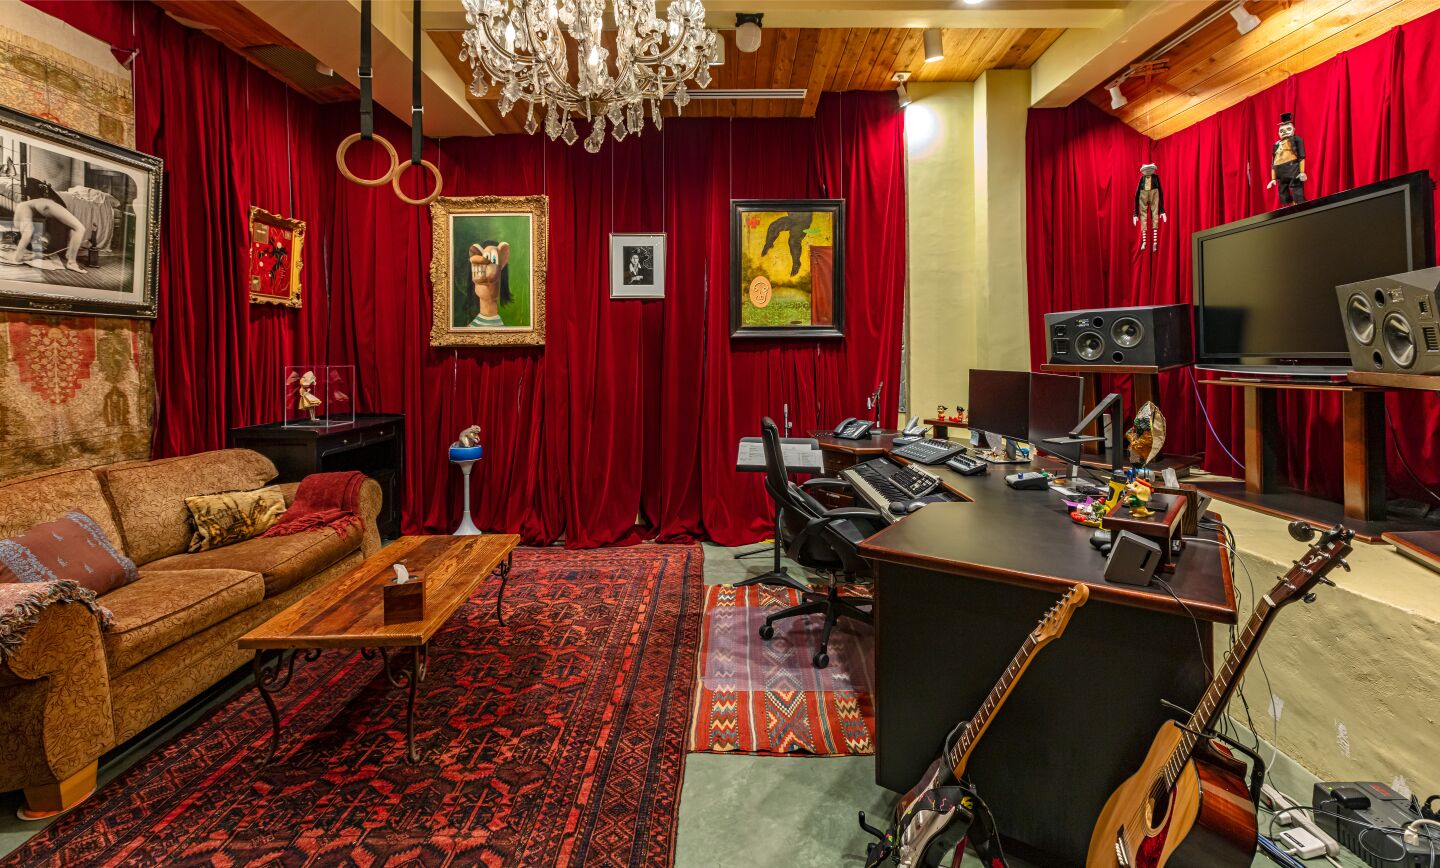 The recording studio with furniture, red draped walls, paintings, guitars and a sound equipment.